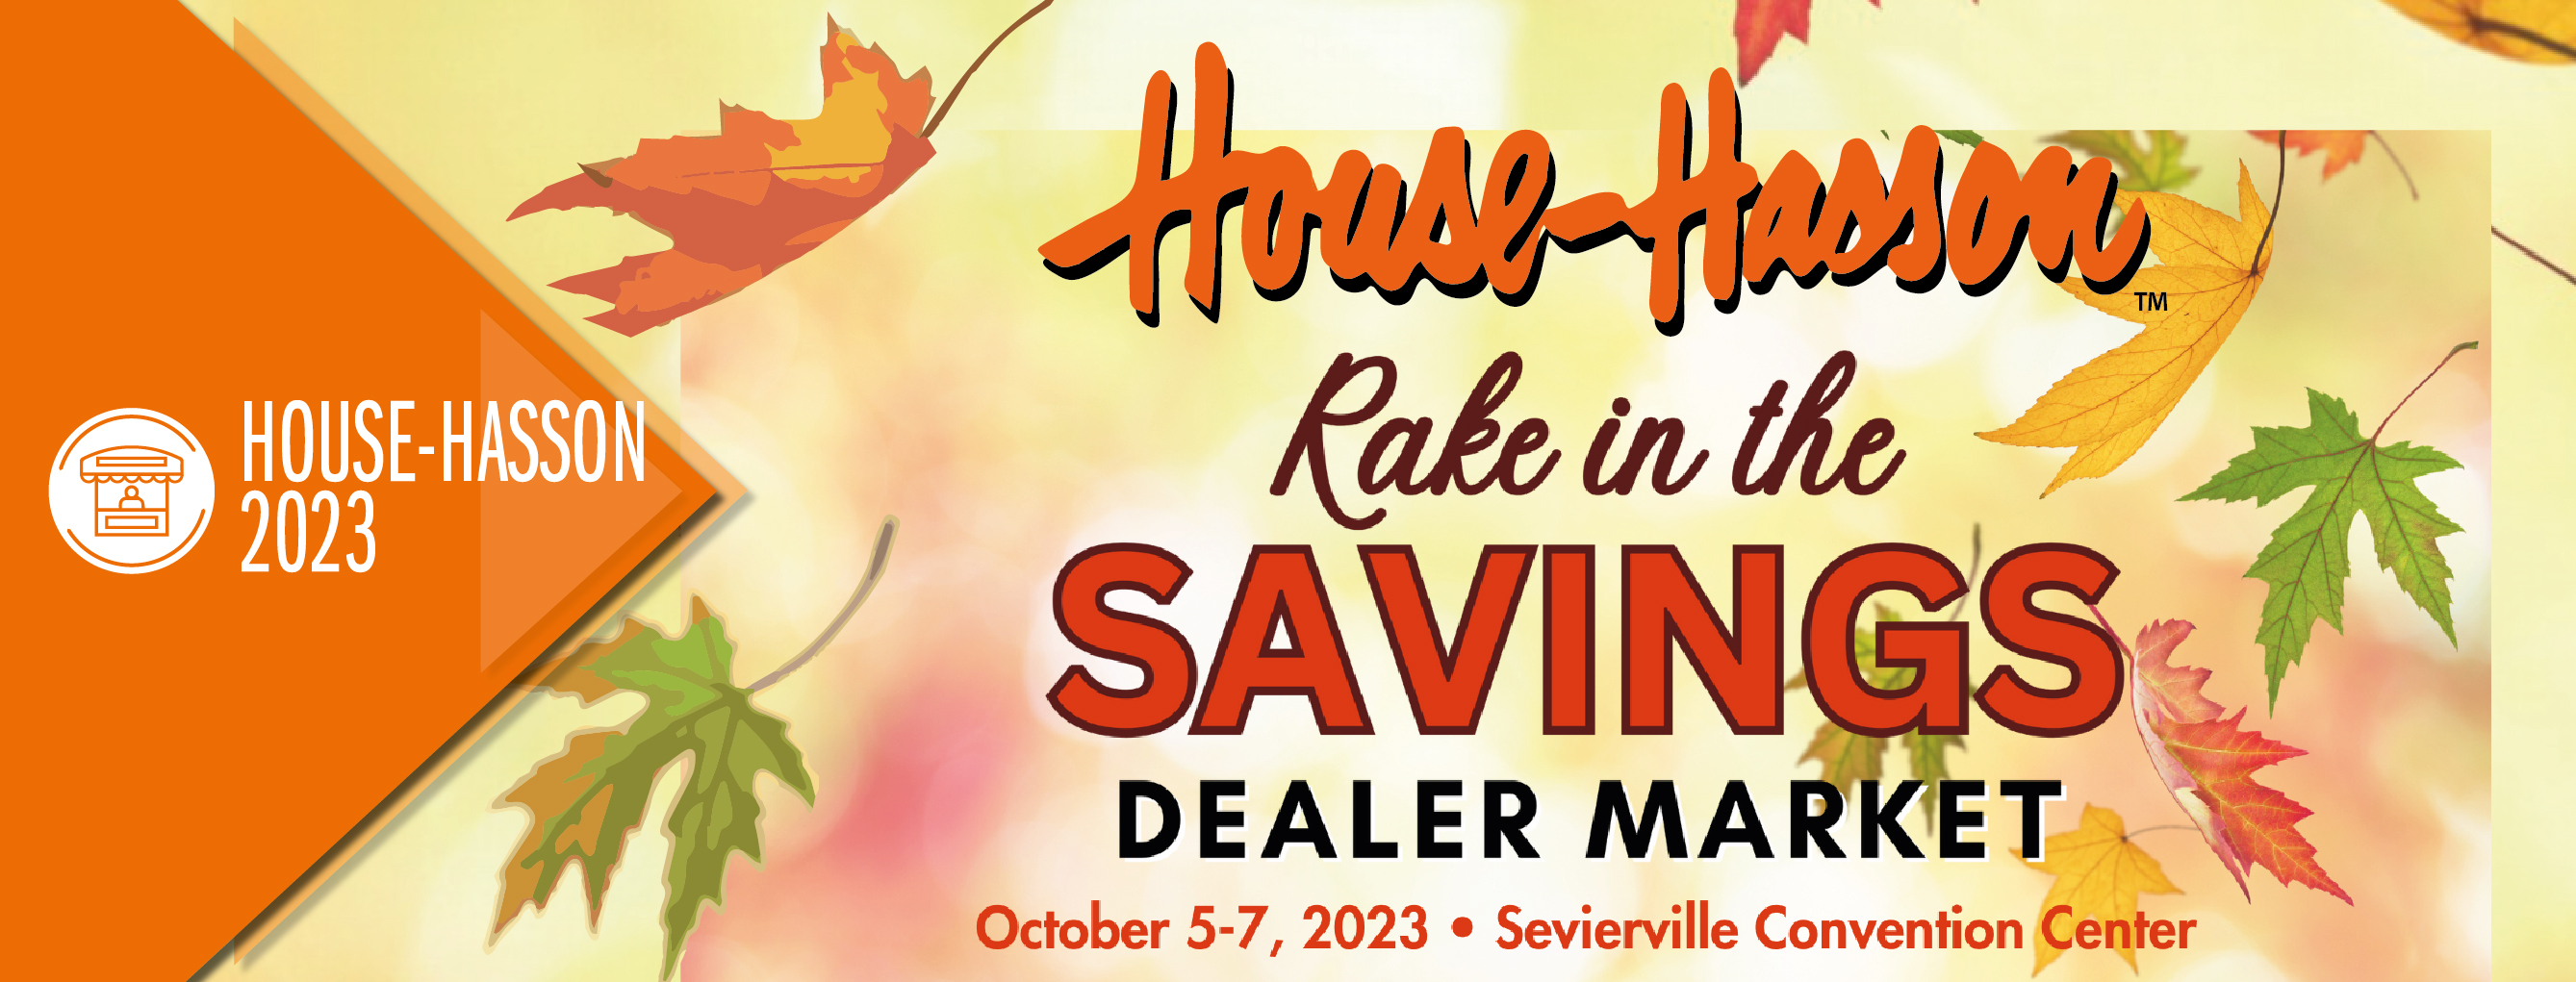 Meet us at House-Hasson Dealer Market October 6th-7th